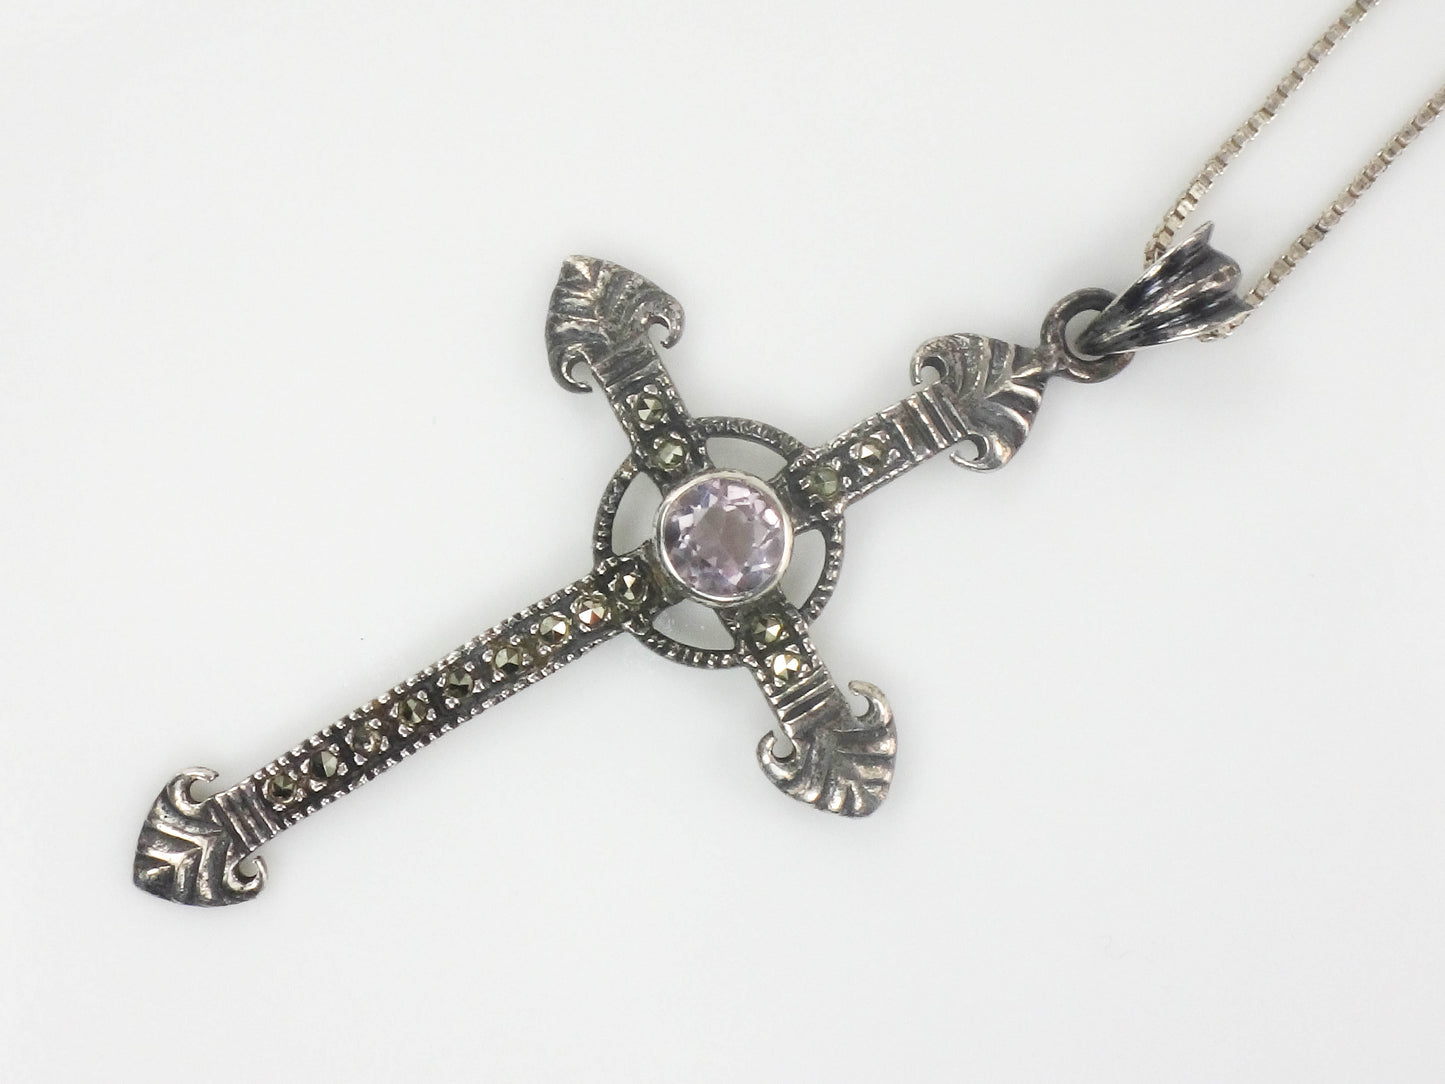 Estate Sterling Silver Large Purple Amethyst and Marcasite Cross Pendant Necklace 24"